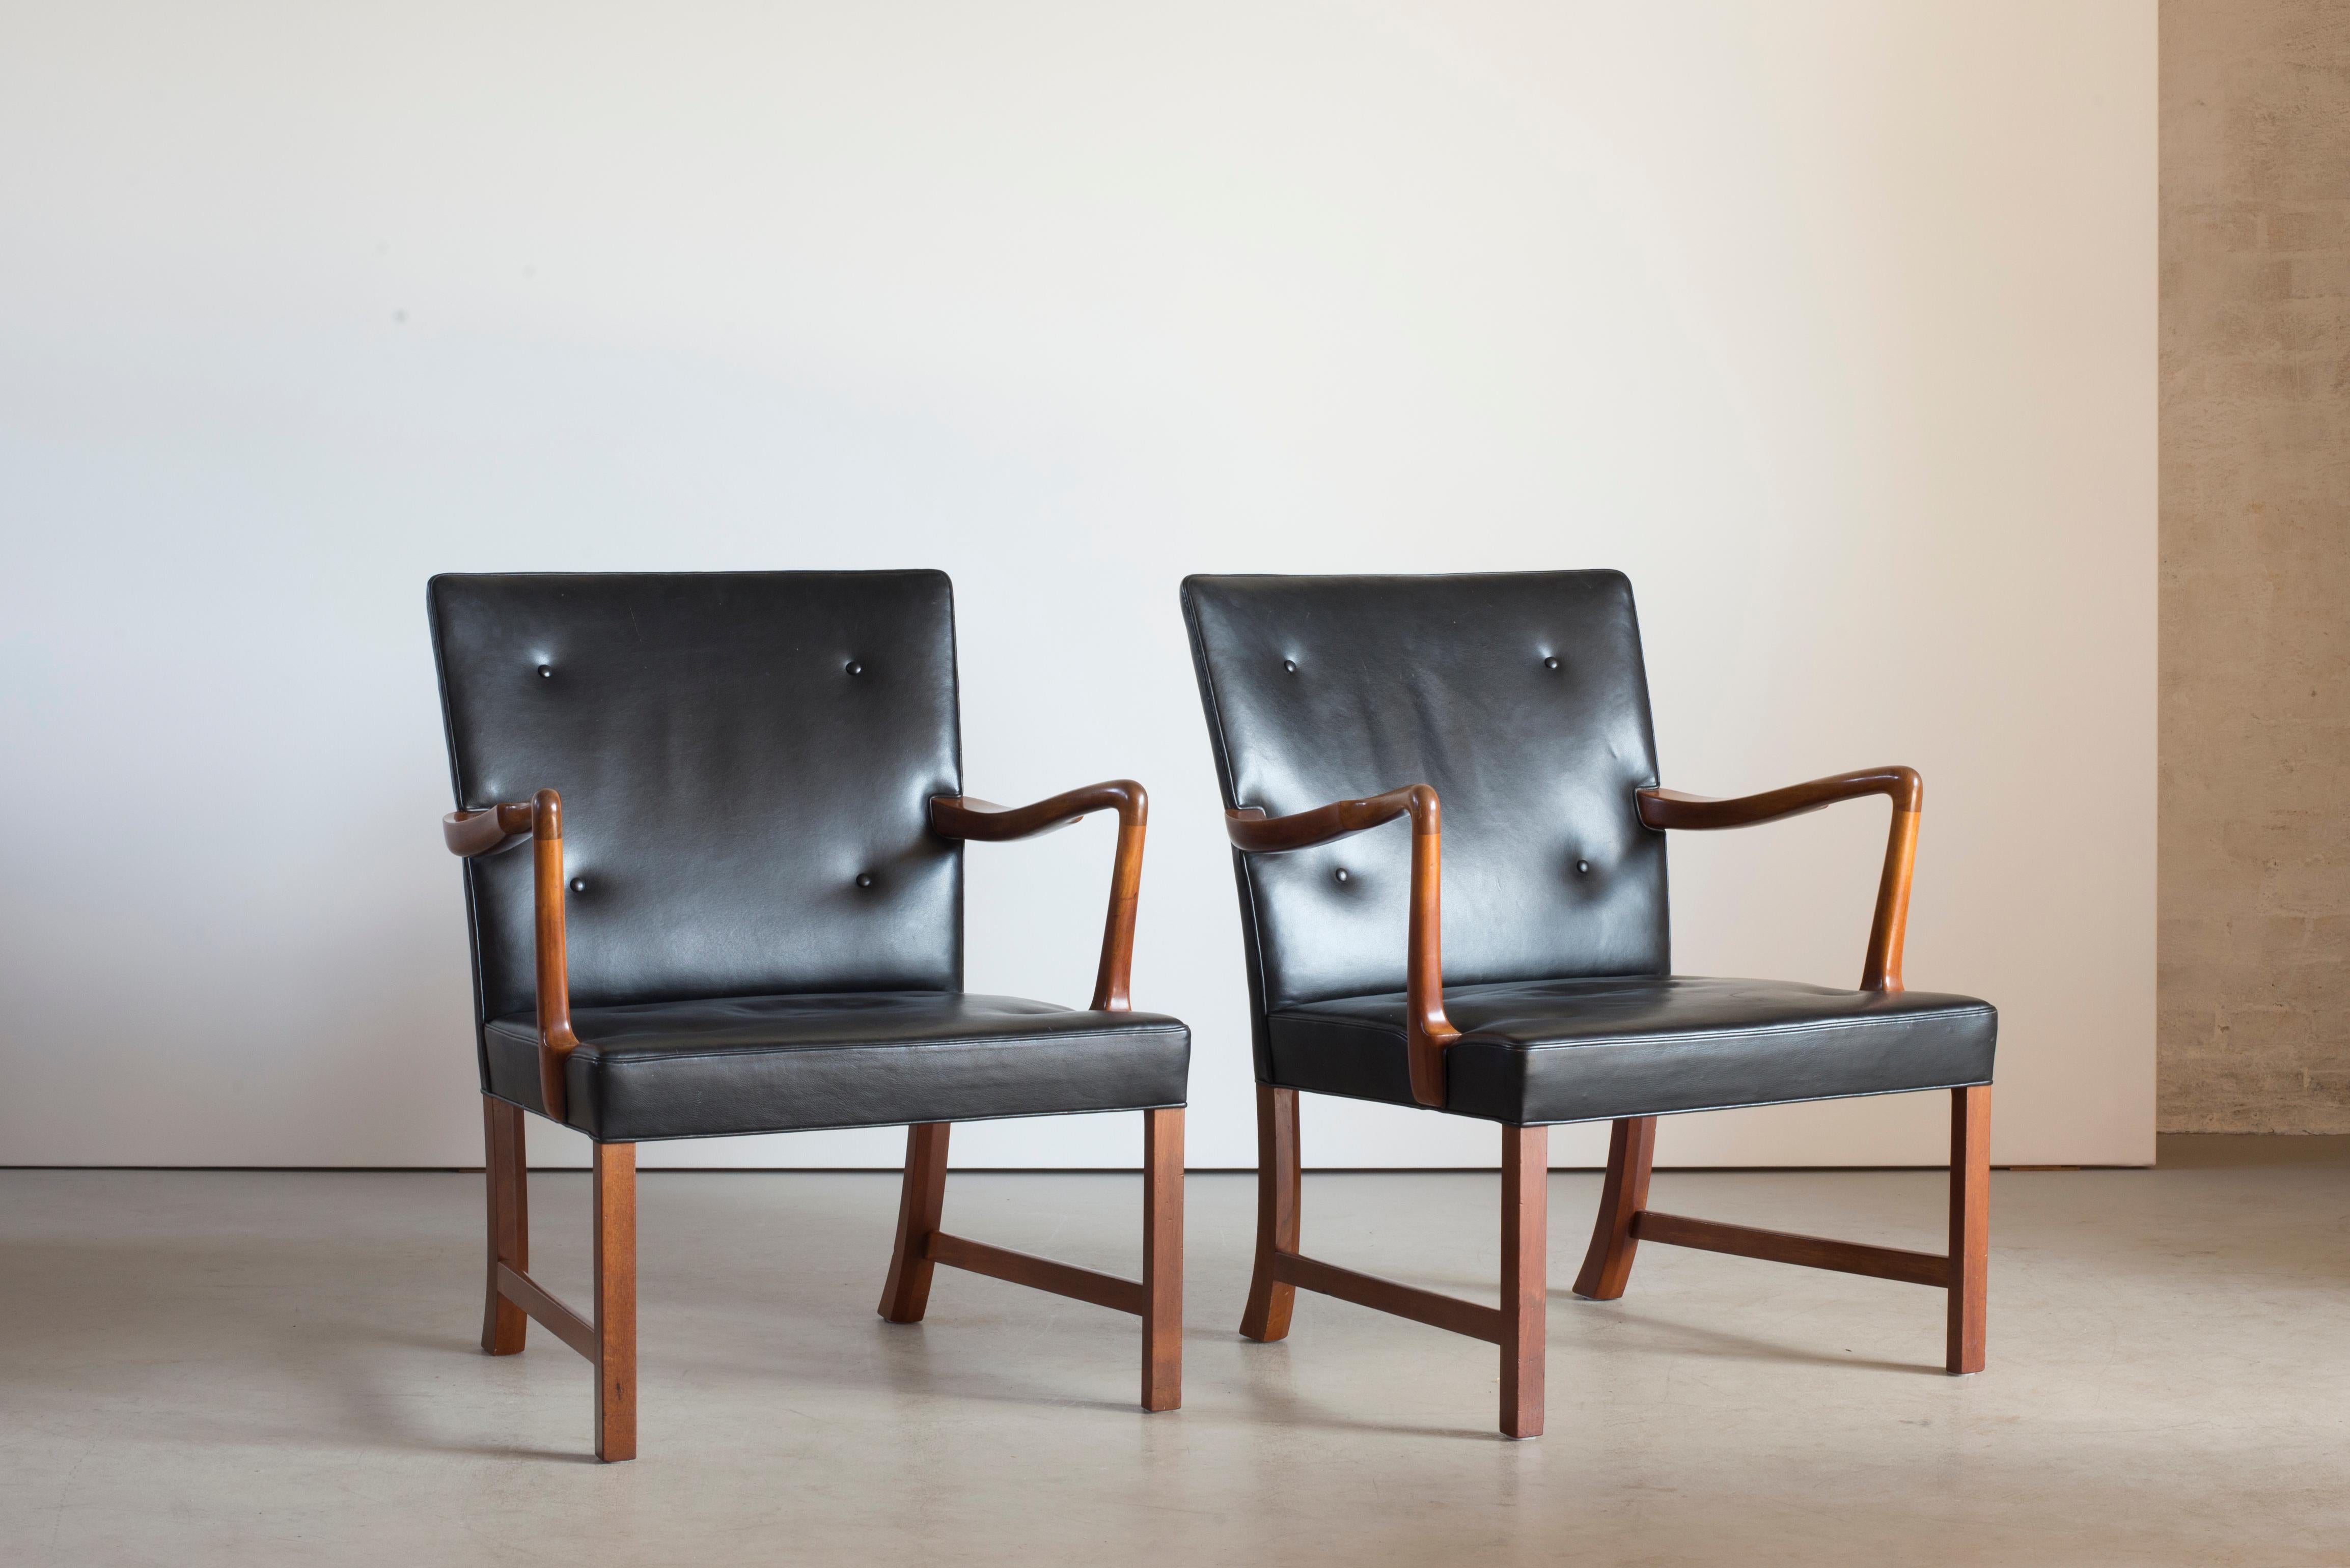 Ole Wanscher pair of armchairs with frame of mahogany. Upholstered with black leather. Executed by A.J. Iversen, Copenhagen, Denmark.